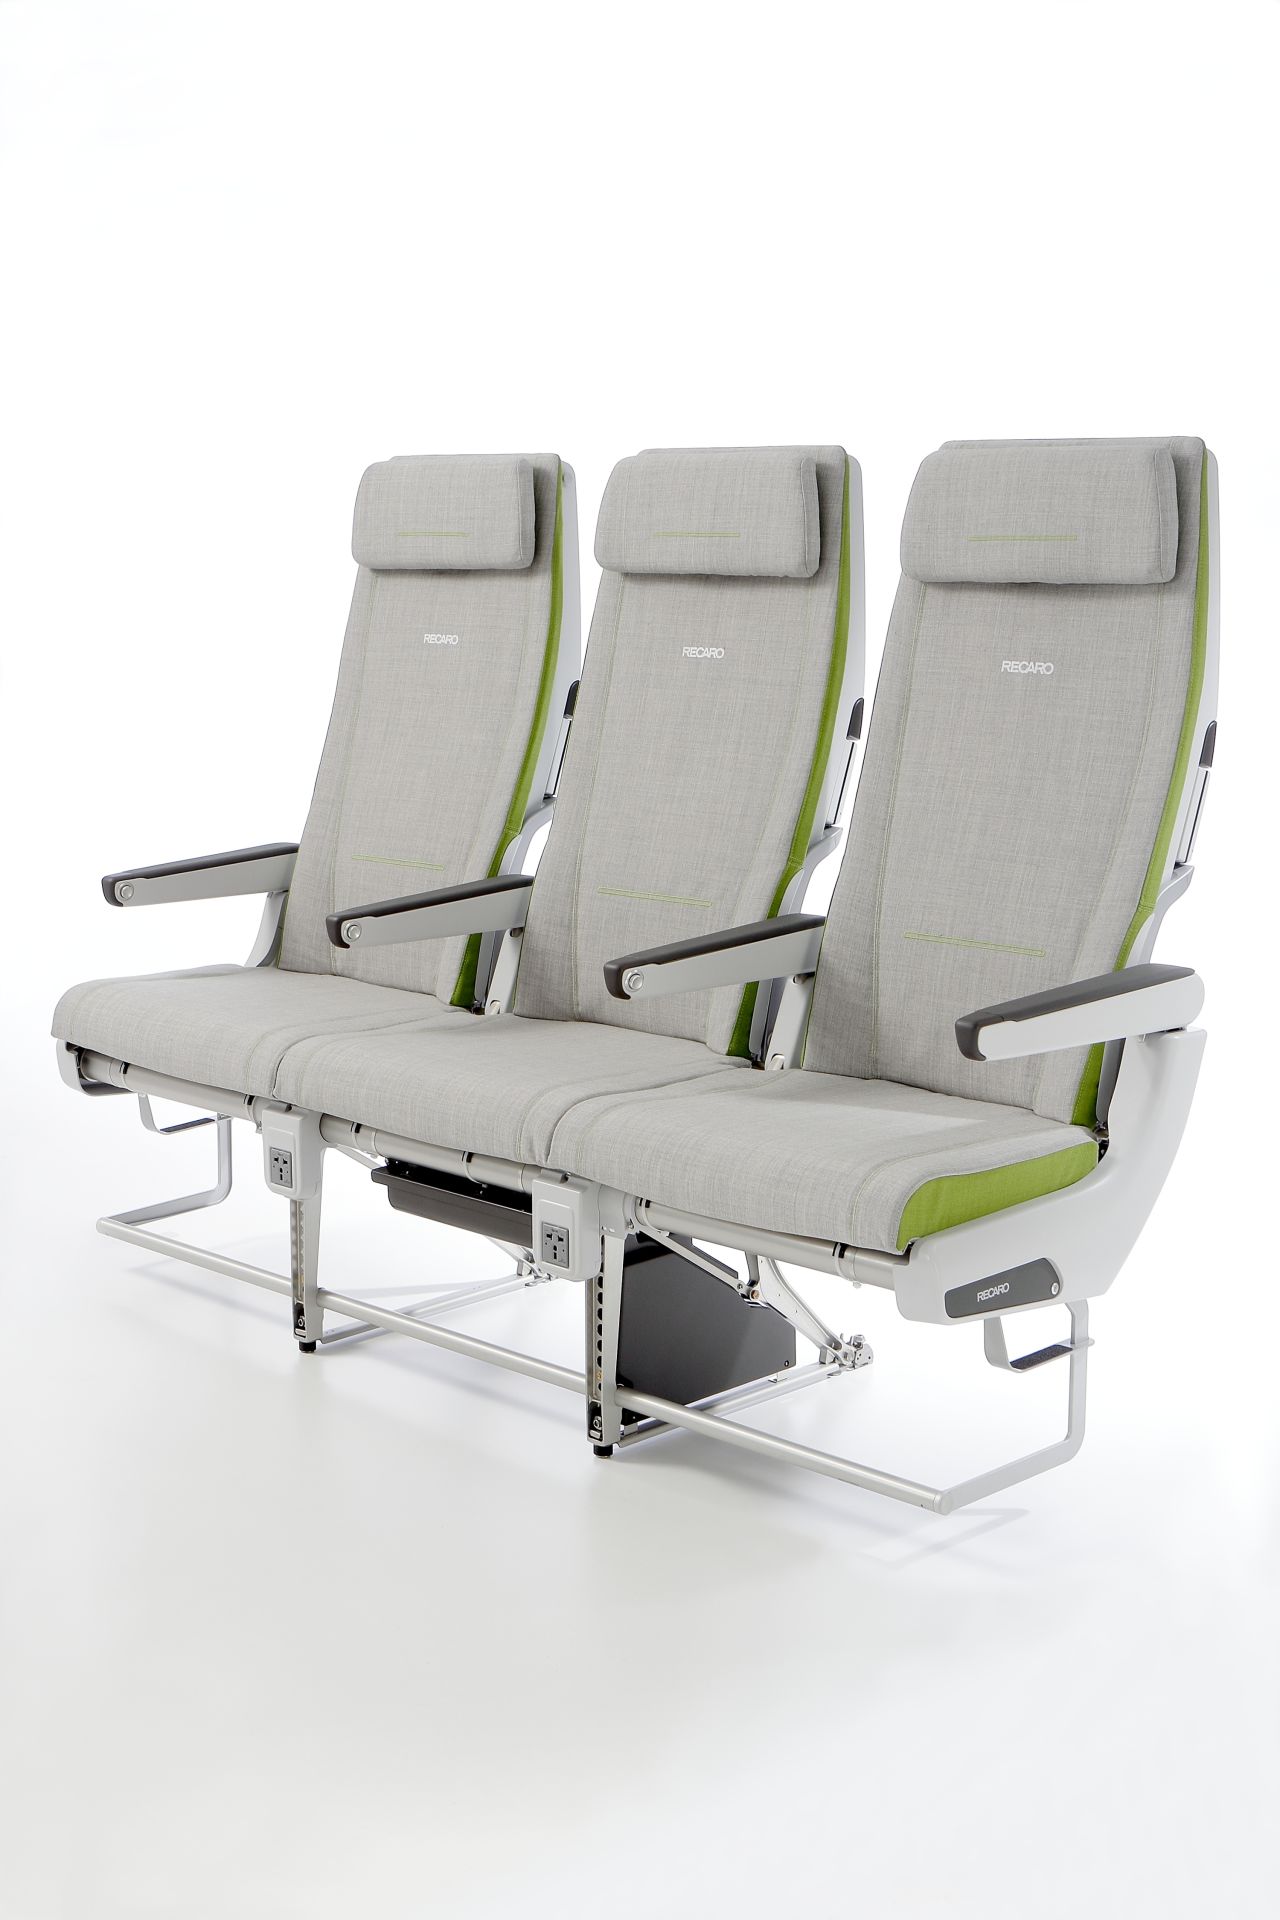 Seat manufacturer Recaro built the CL3710 to be slimmer so that passengers get more legroom.